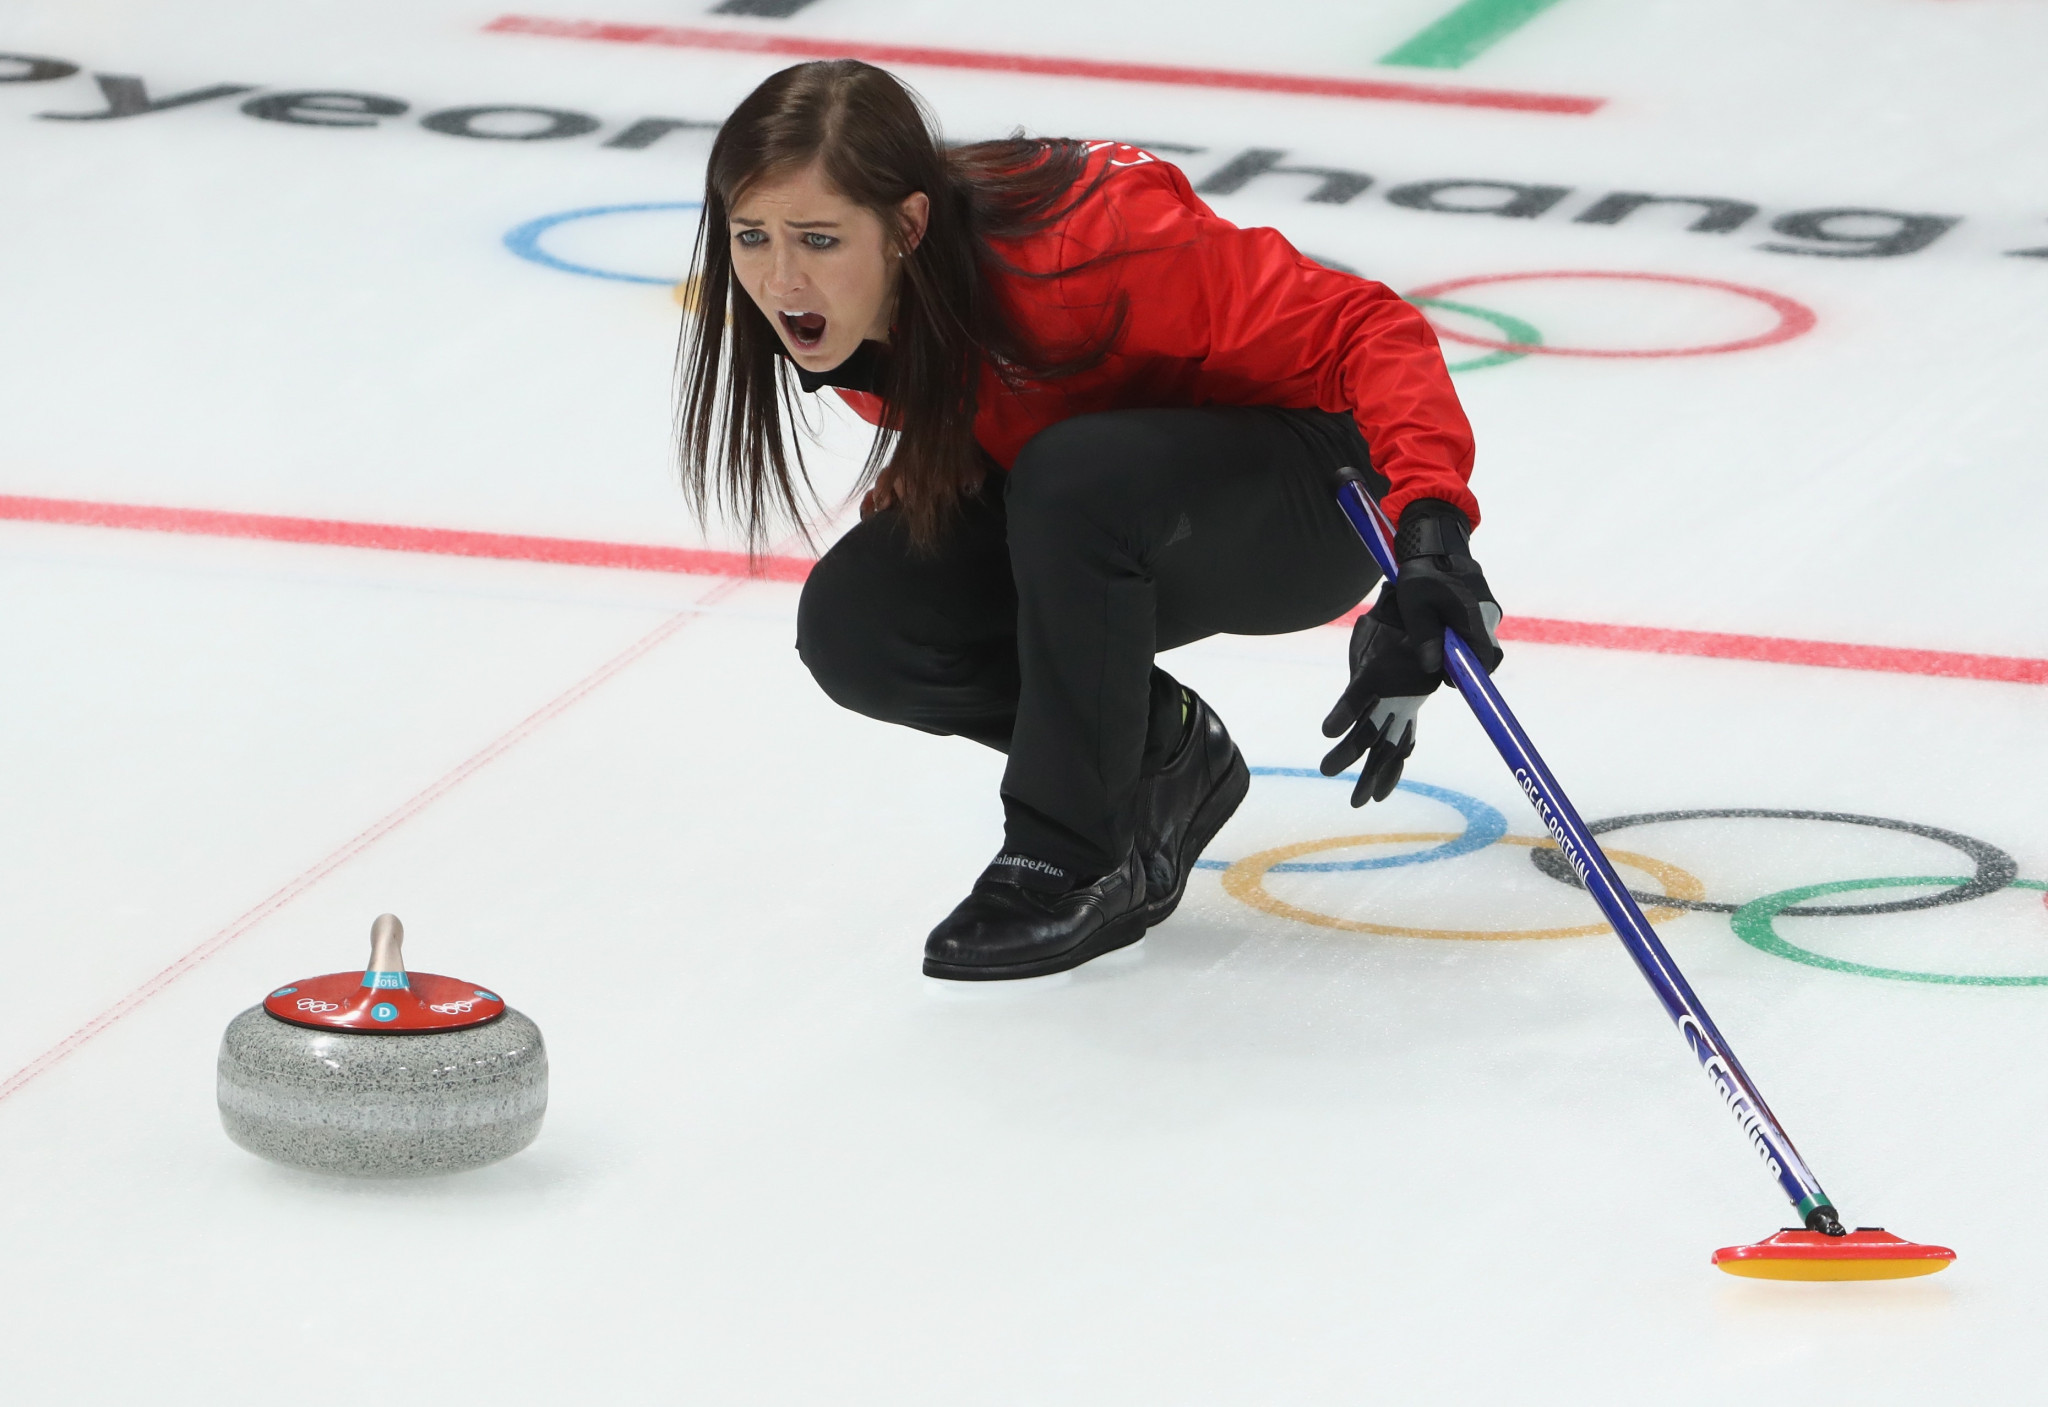 Eve Muirhead, skip of Great Britain's women's curling team, has claimed doping is 